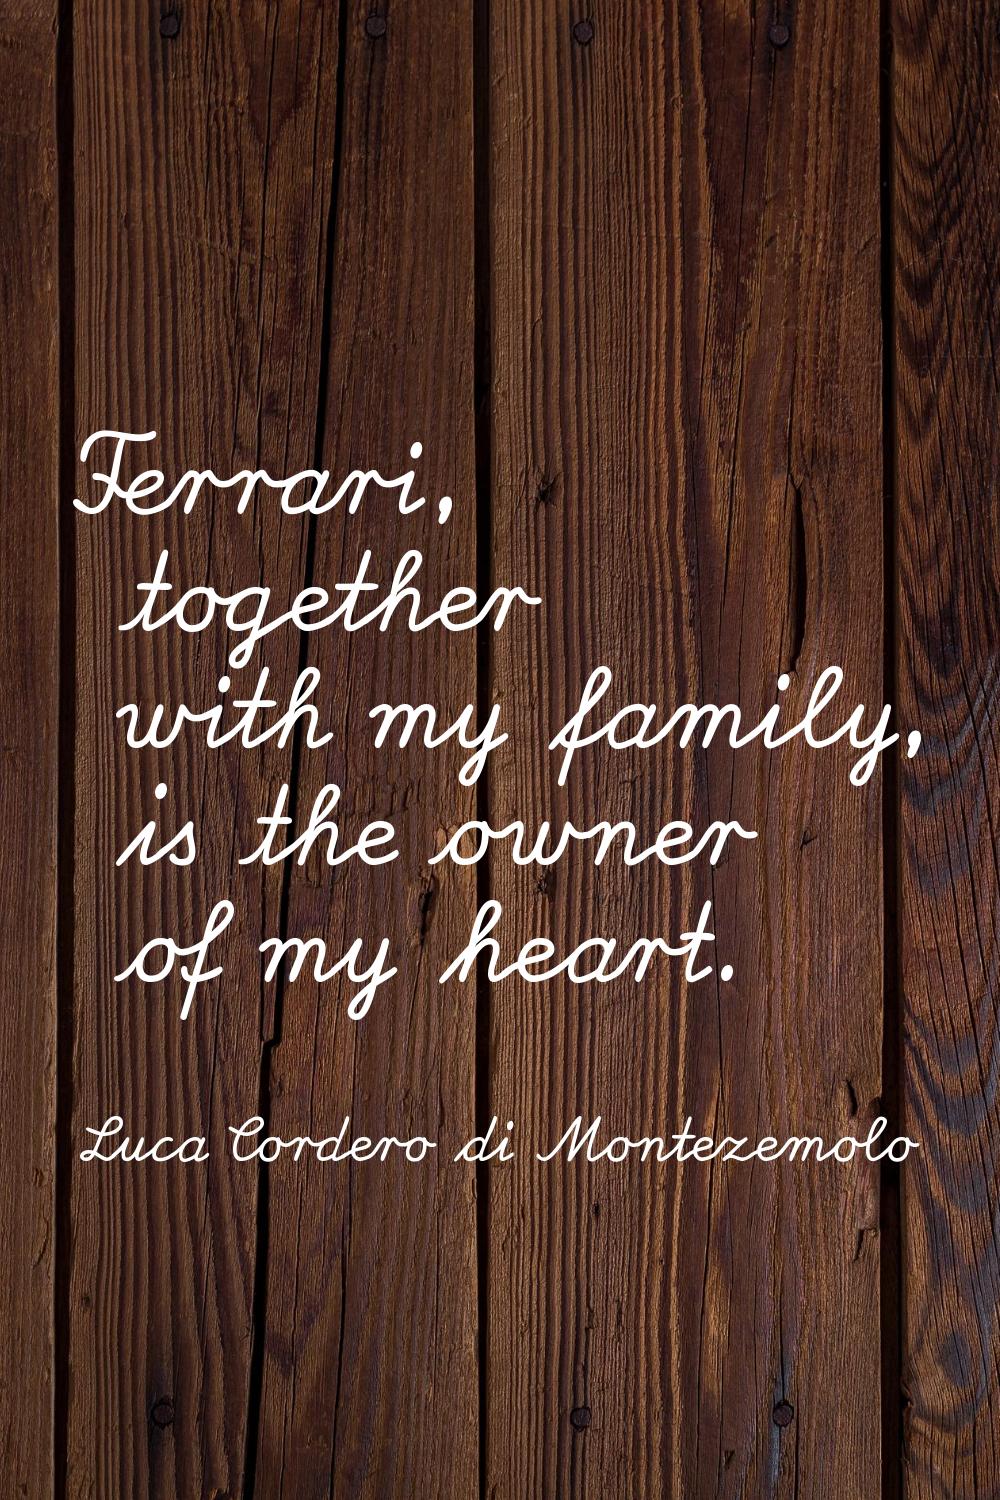 Ferrari, together with my family, is the owner of my heart.